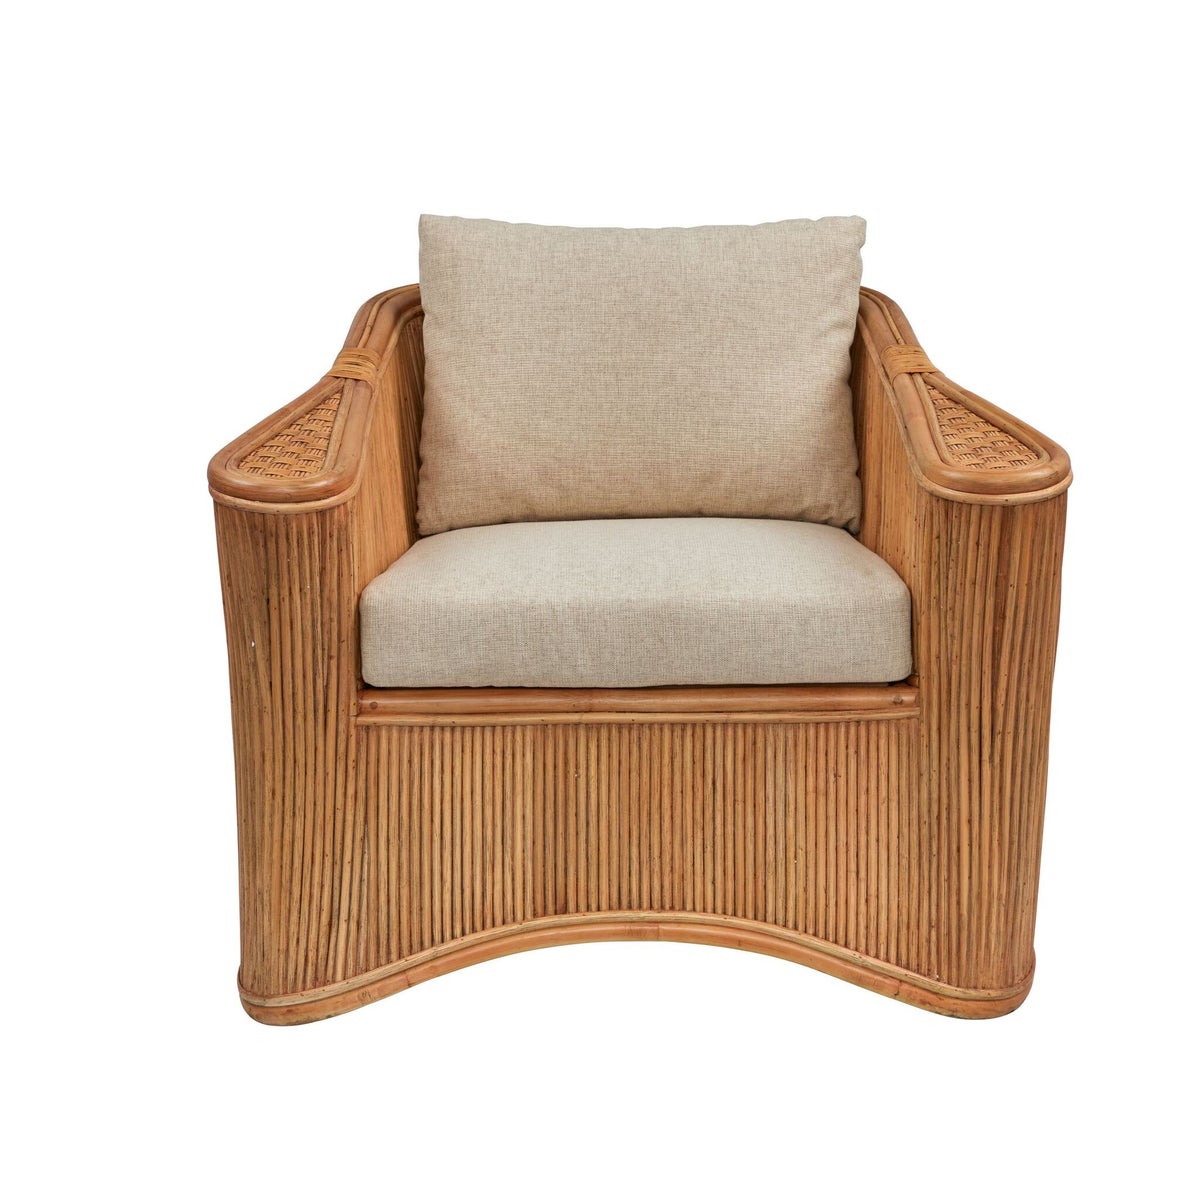 CLOSE-OUT!!Admirals Club Chair Frame Color - Buff  Cushion Color - Cream Jarrett Bay Collection